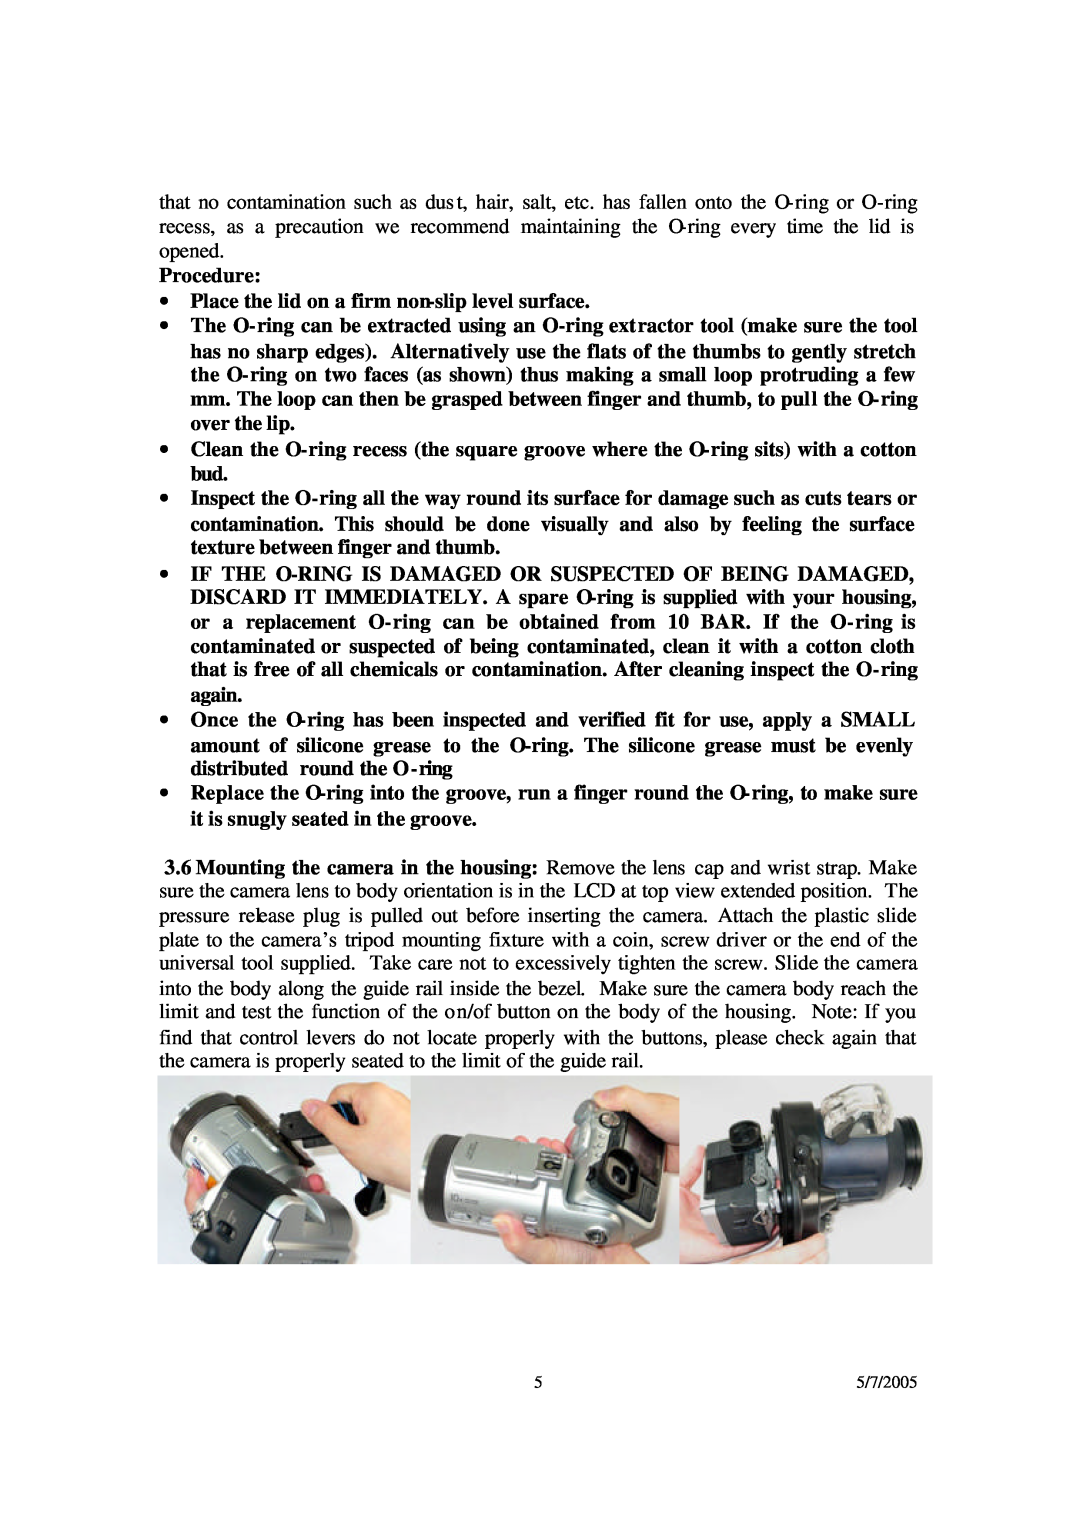 Sony DSC-F707 / 717 user manual Procedure ∙ Place the lid on a firm non-slip level surface 